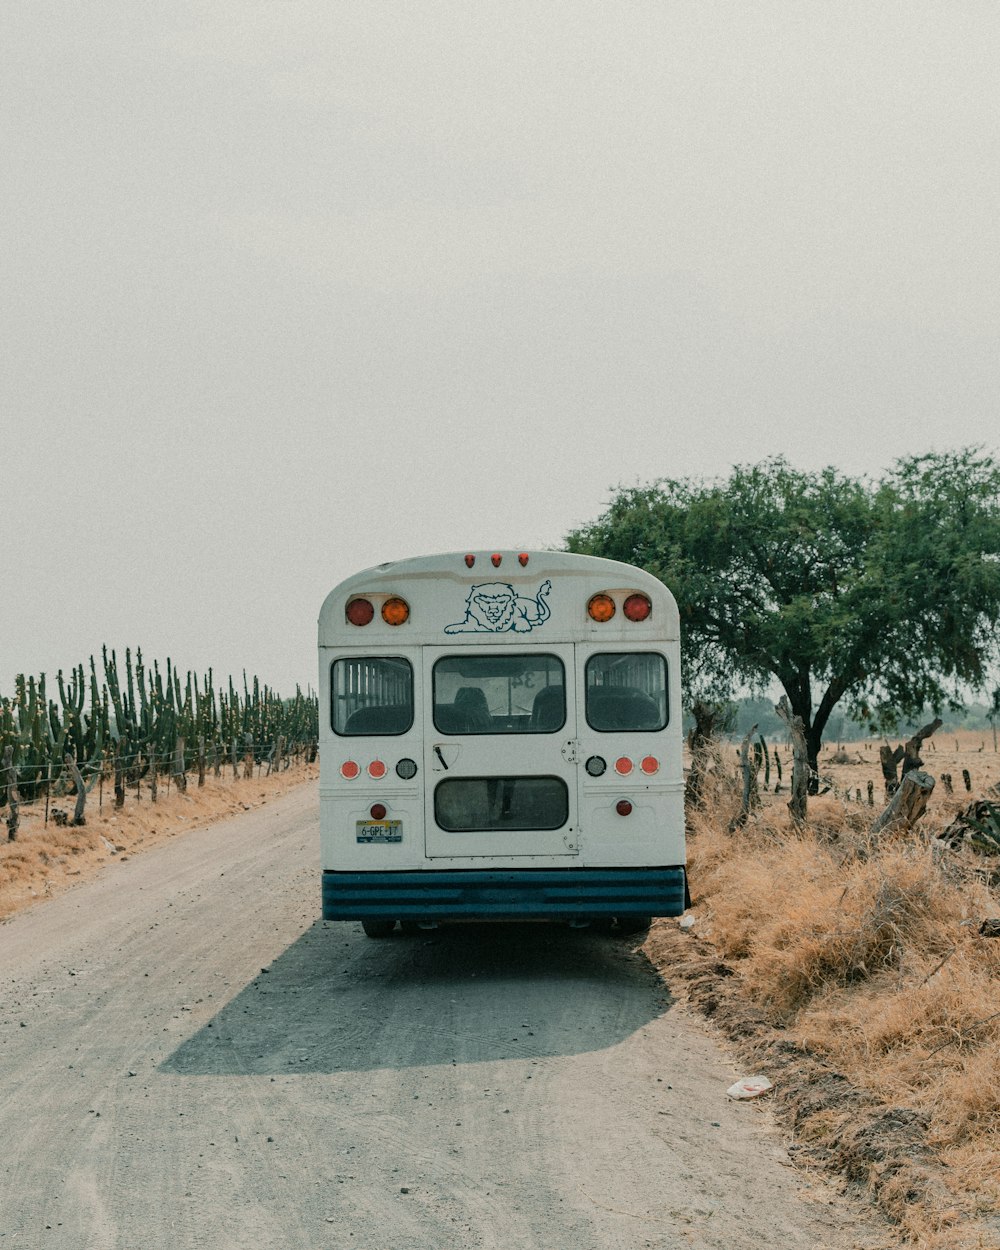 white and blue bus on road during daytime